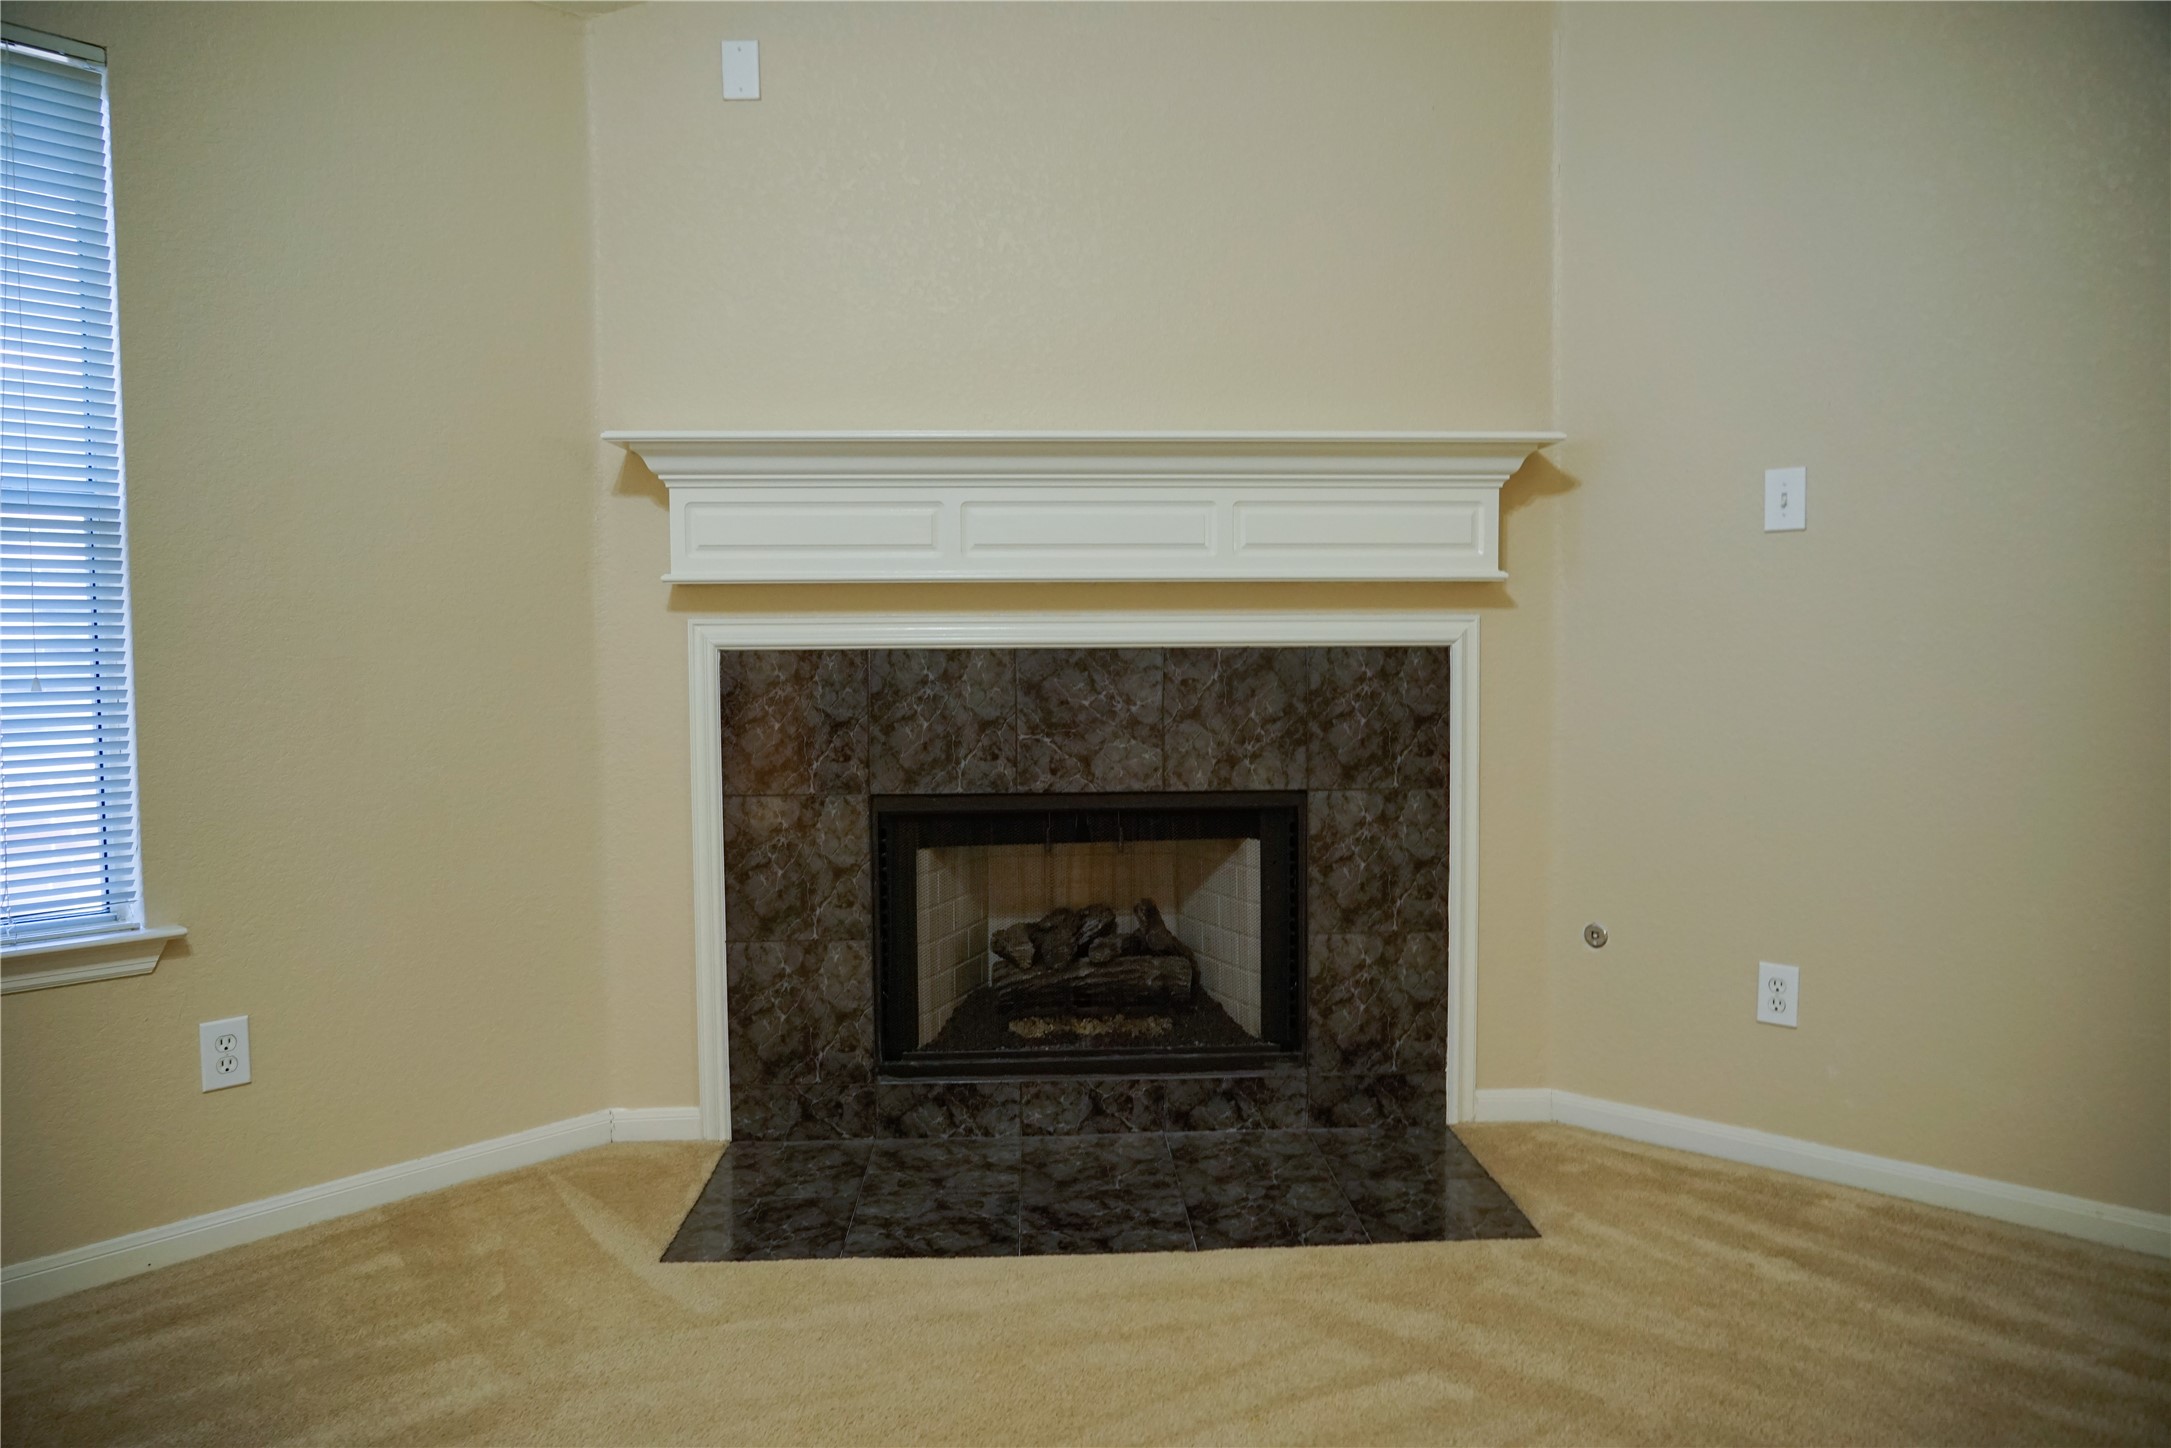 Fireplace in living Room